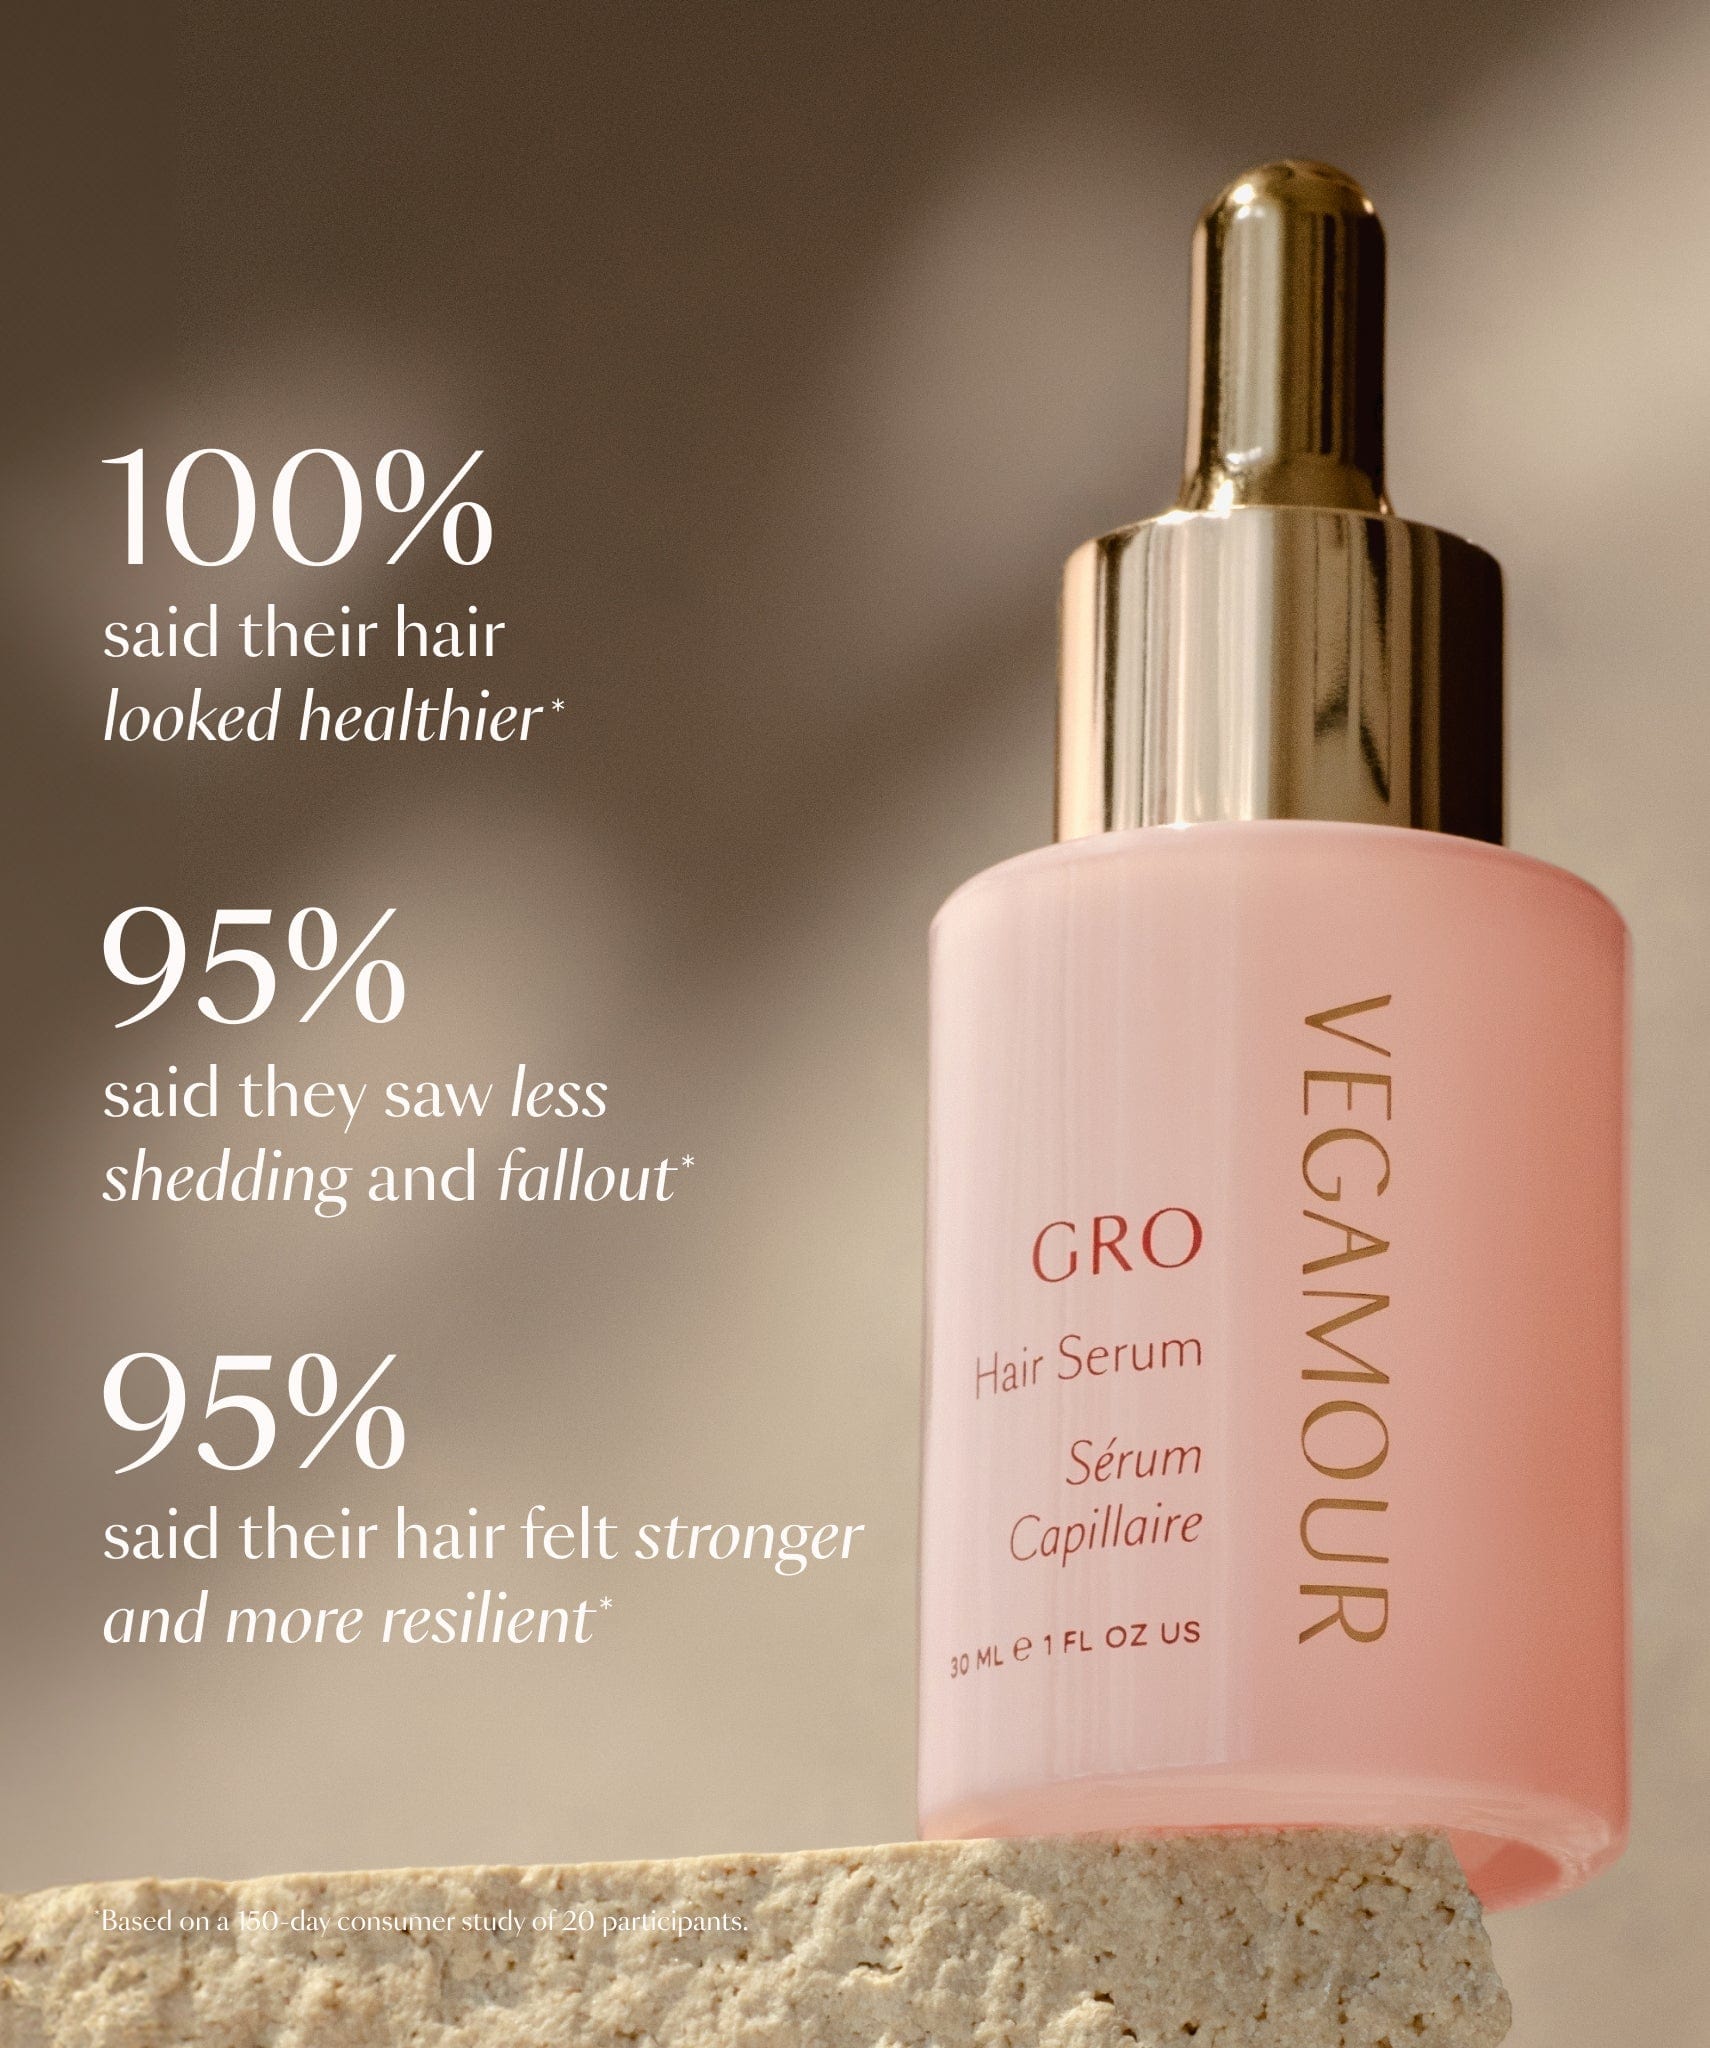 Complimentary: GRO and Shine Duo